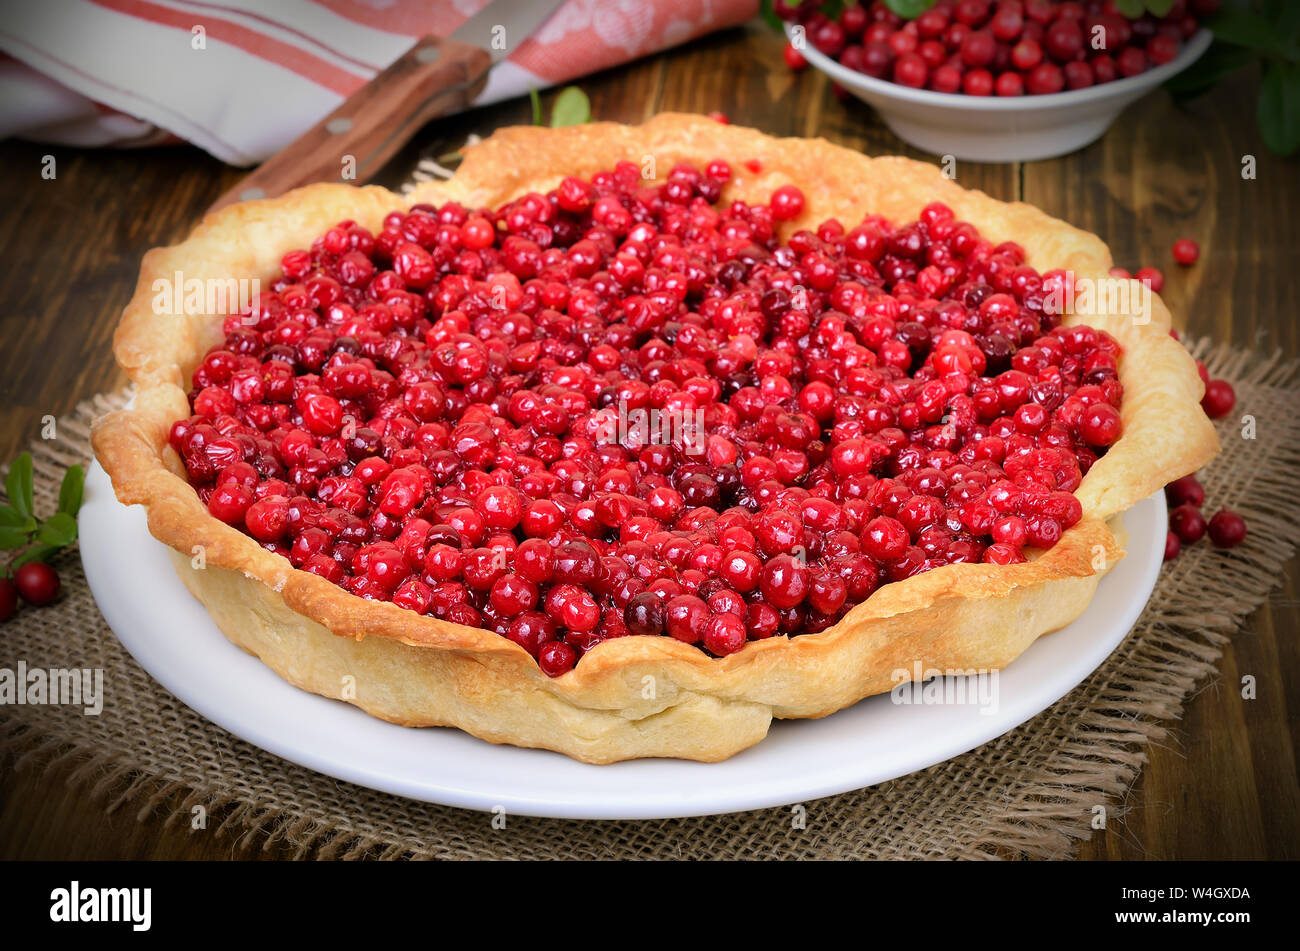 Appetizing cowberry pie on wooden table,close up Stock Photo